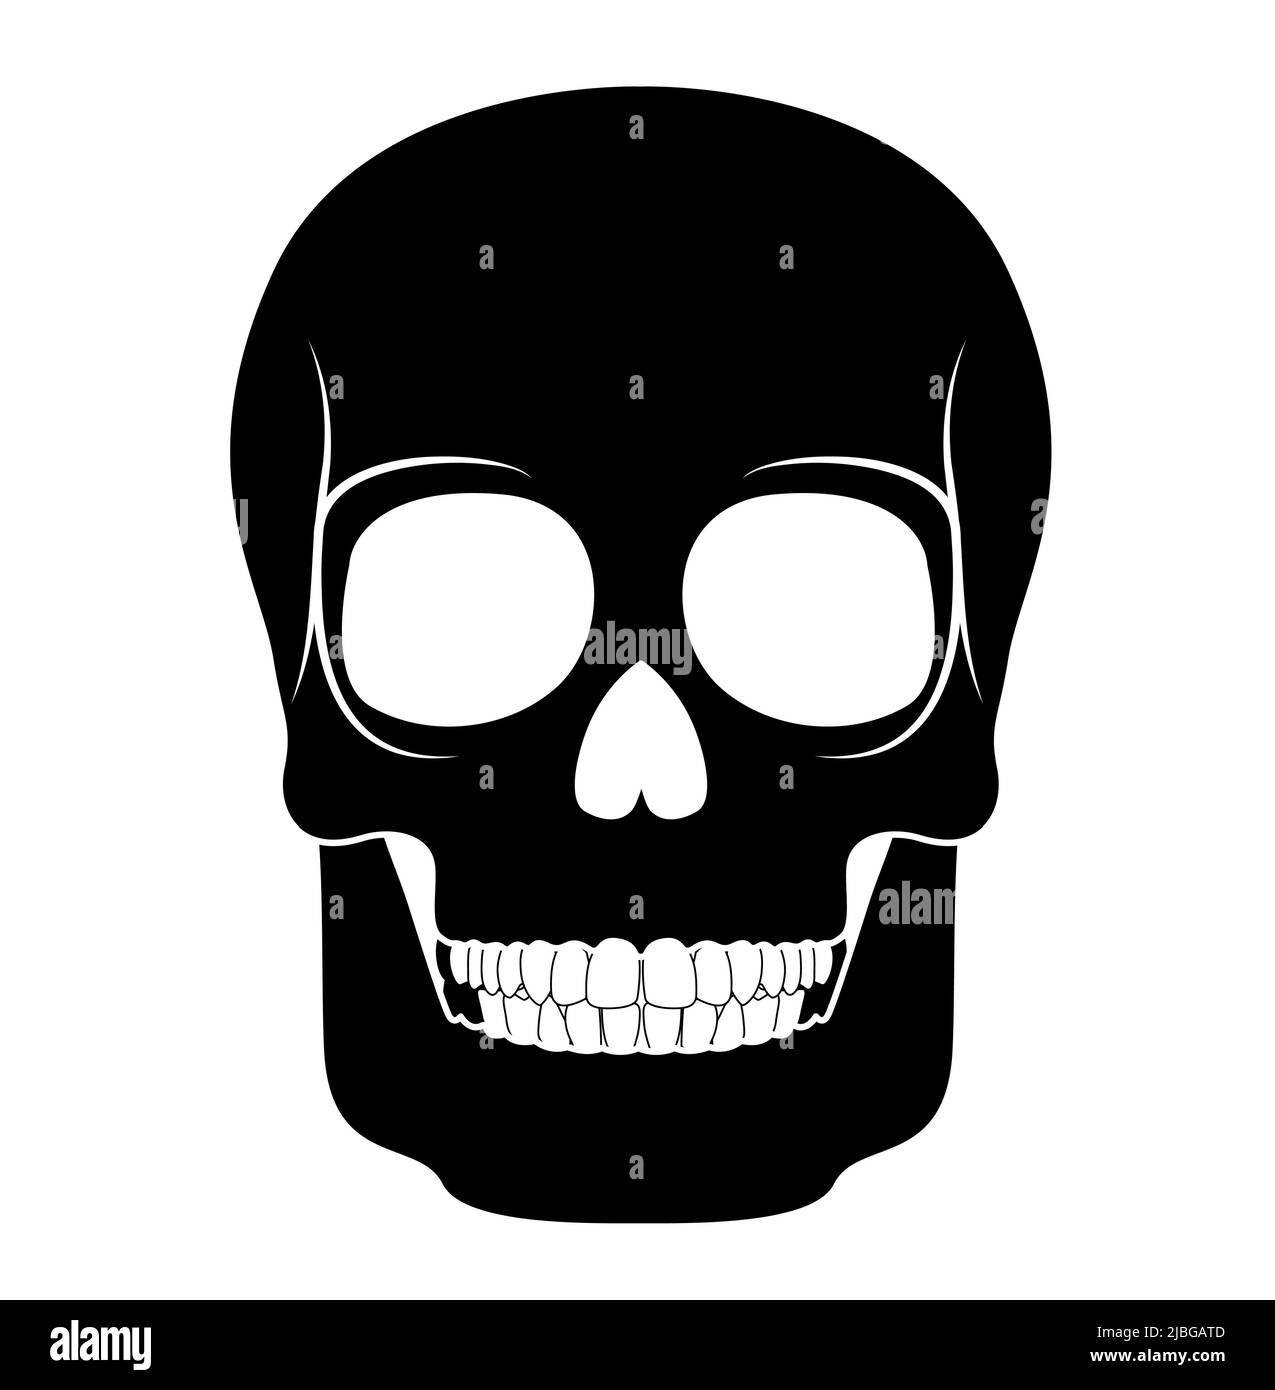 Skeleton Human skull silhouette head body bones - cranium, facial, calvaria, mandible front Anterior ventral view flat black color concept Vector illustration of anatomy isolated on white background Stock Vector